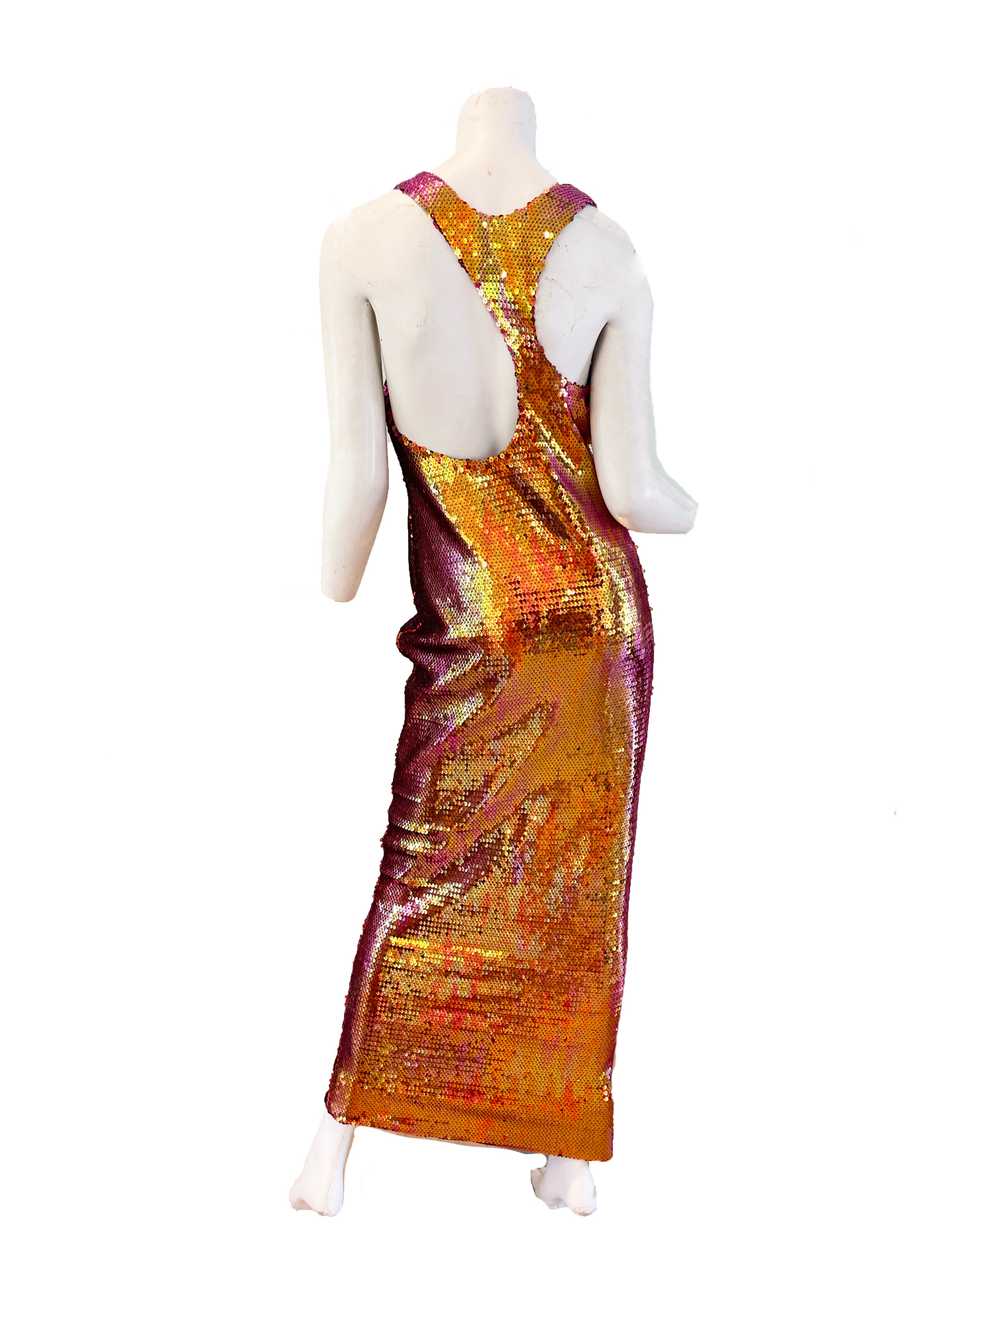 1988 STEPHEN SPROUSE Sequin Gown - image 3